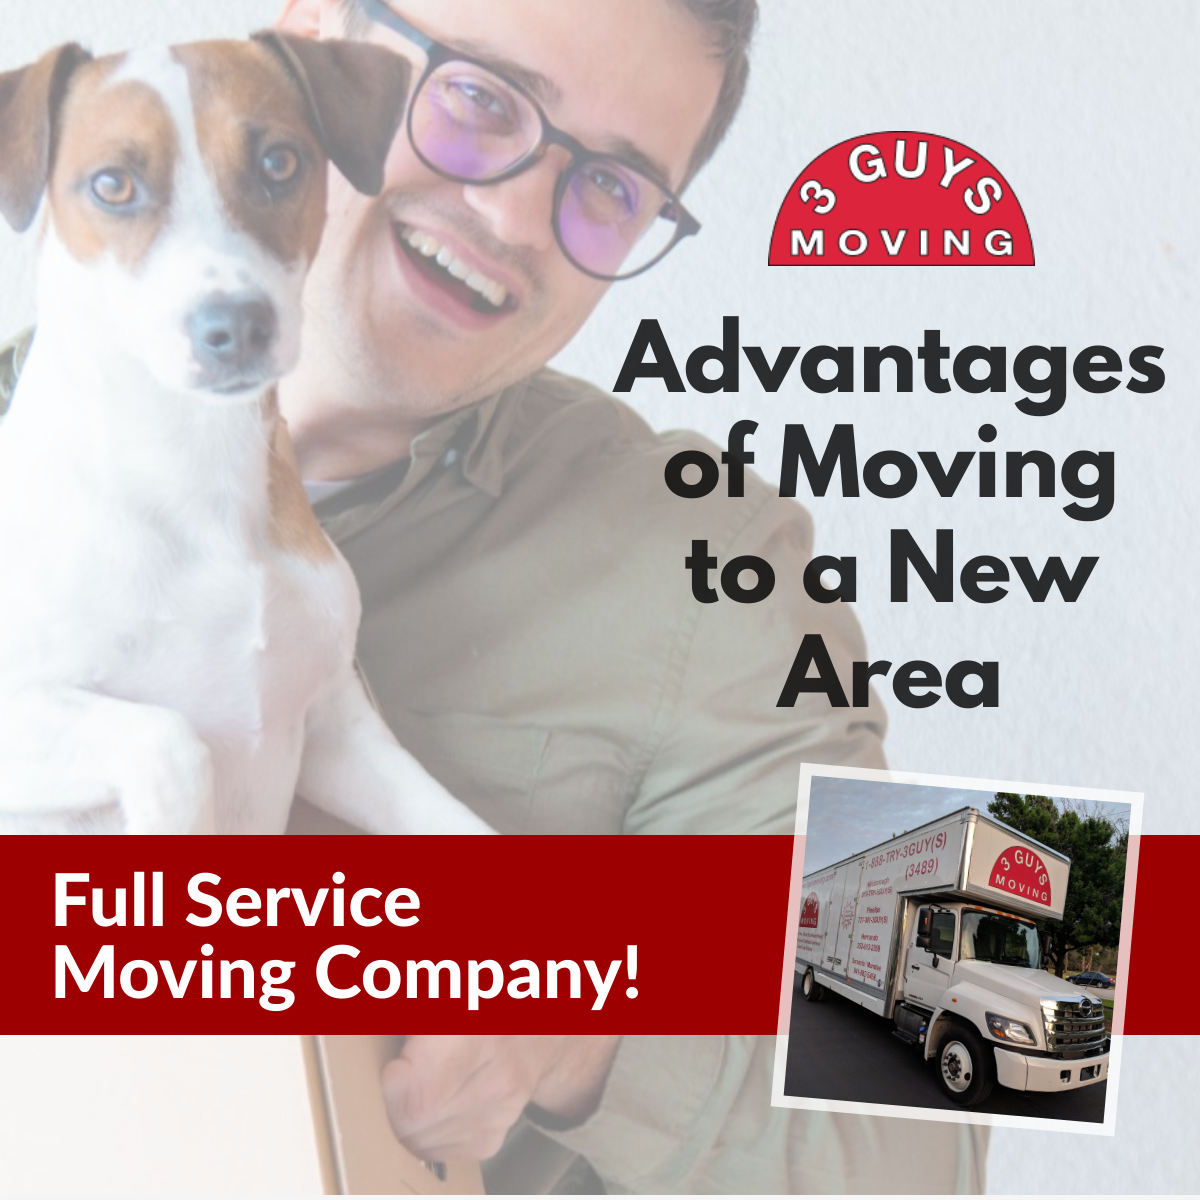 Advantages of Moving to a New Area - Advantages of Moving to a New Area